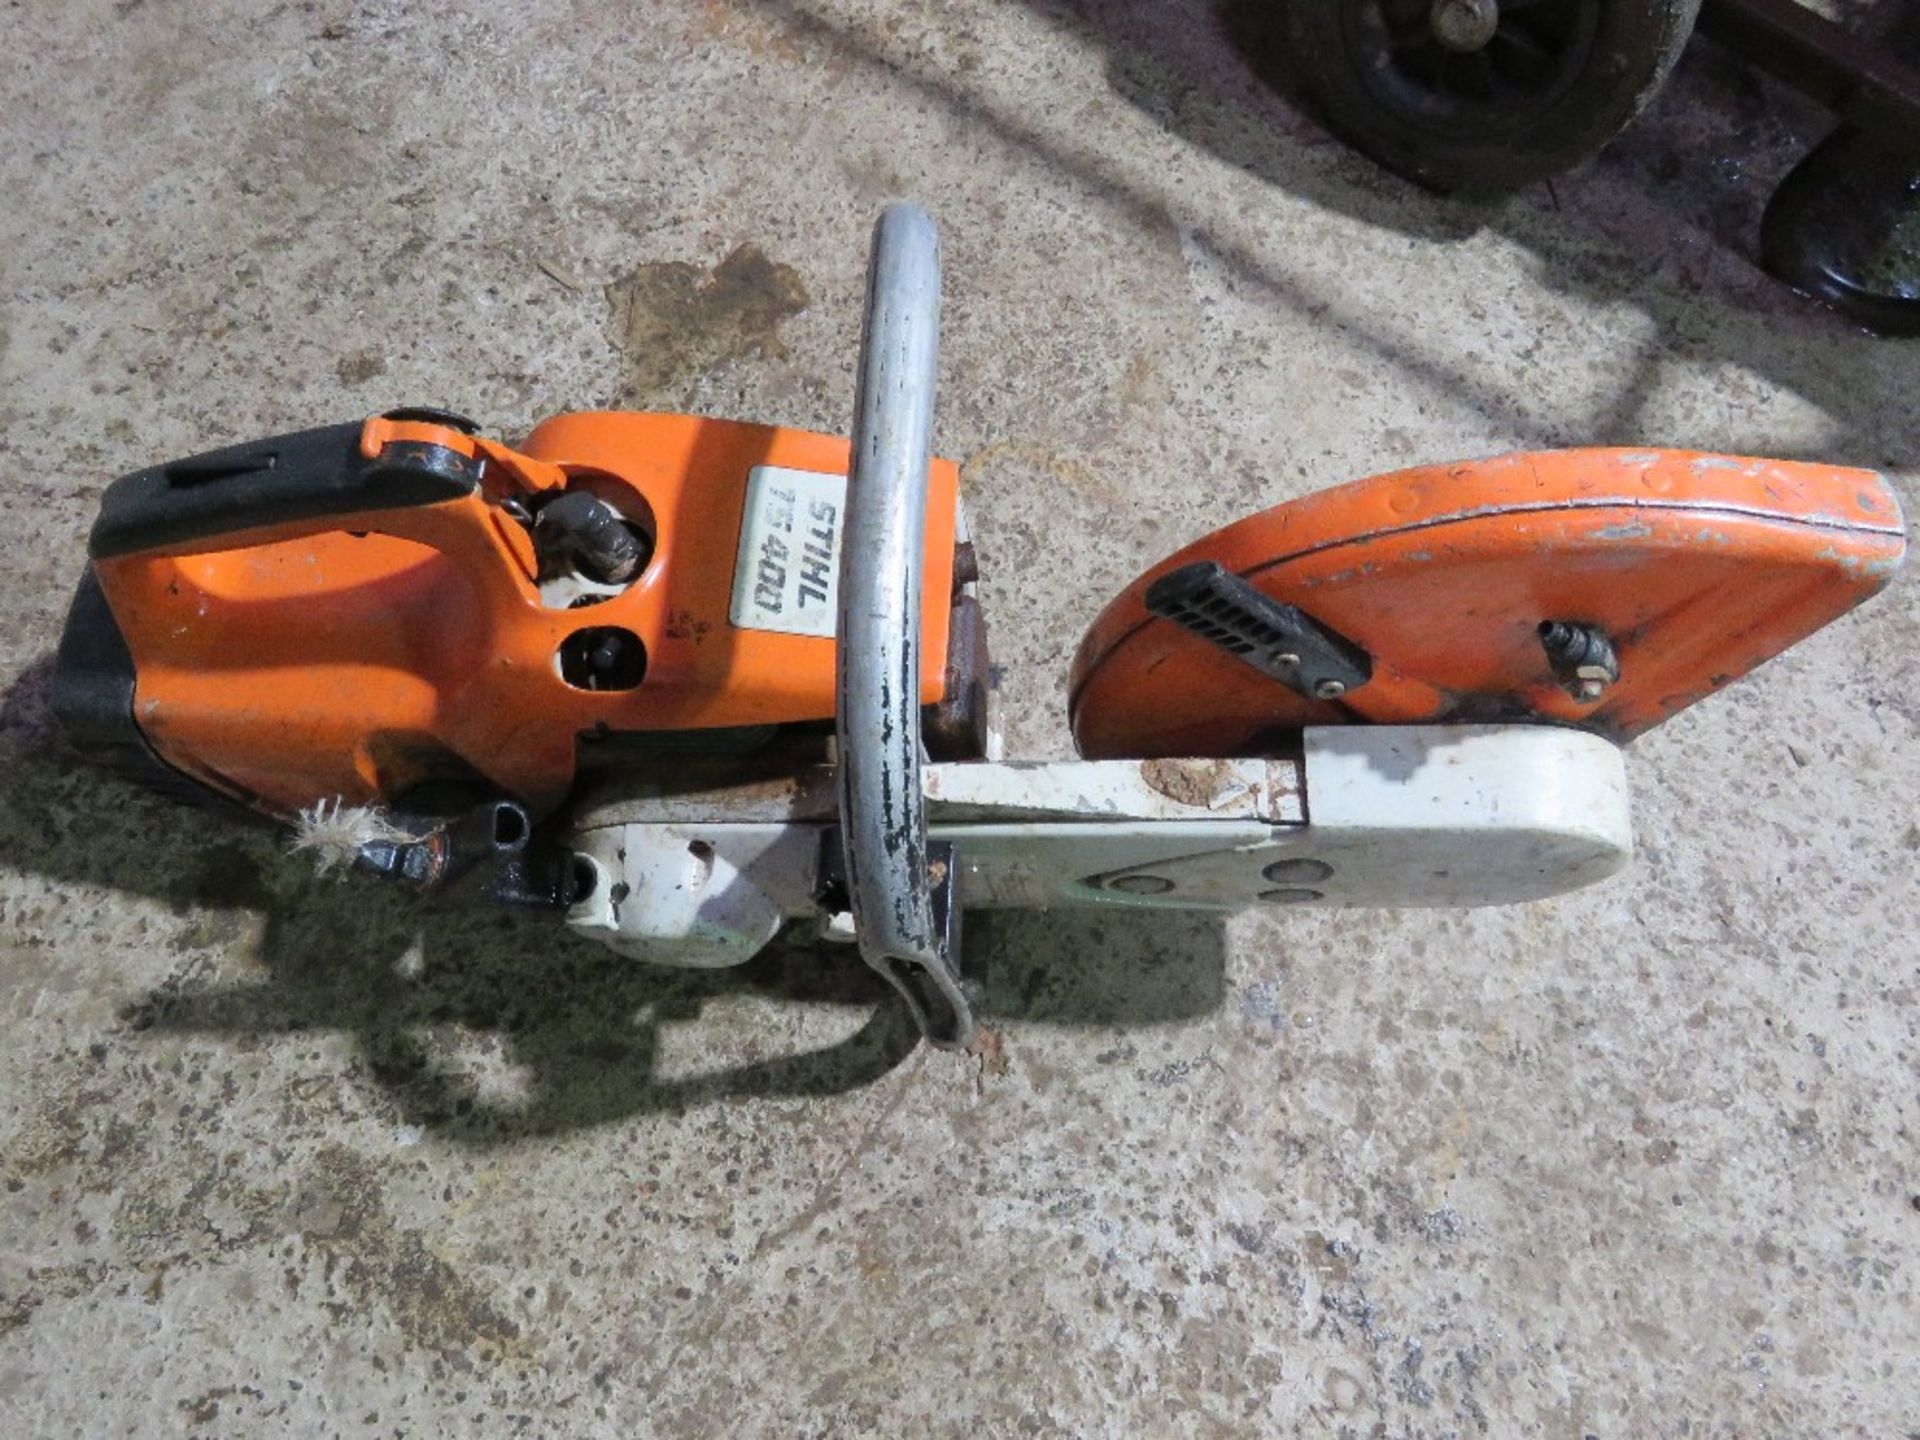 STIHL TS400 PETROL ENGINED CUT OFF SAW. THIS LOT IS SOLD UNDER THE AUCTIONEERS MARGIN SCHEME, THE - Image 2 of 3